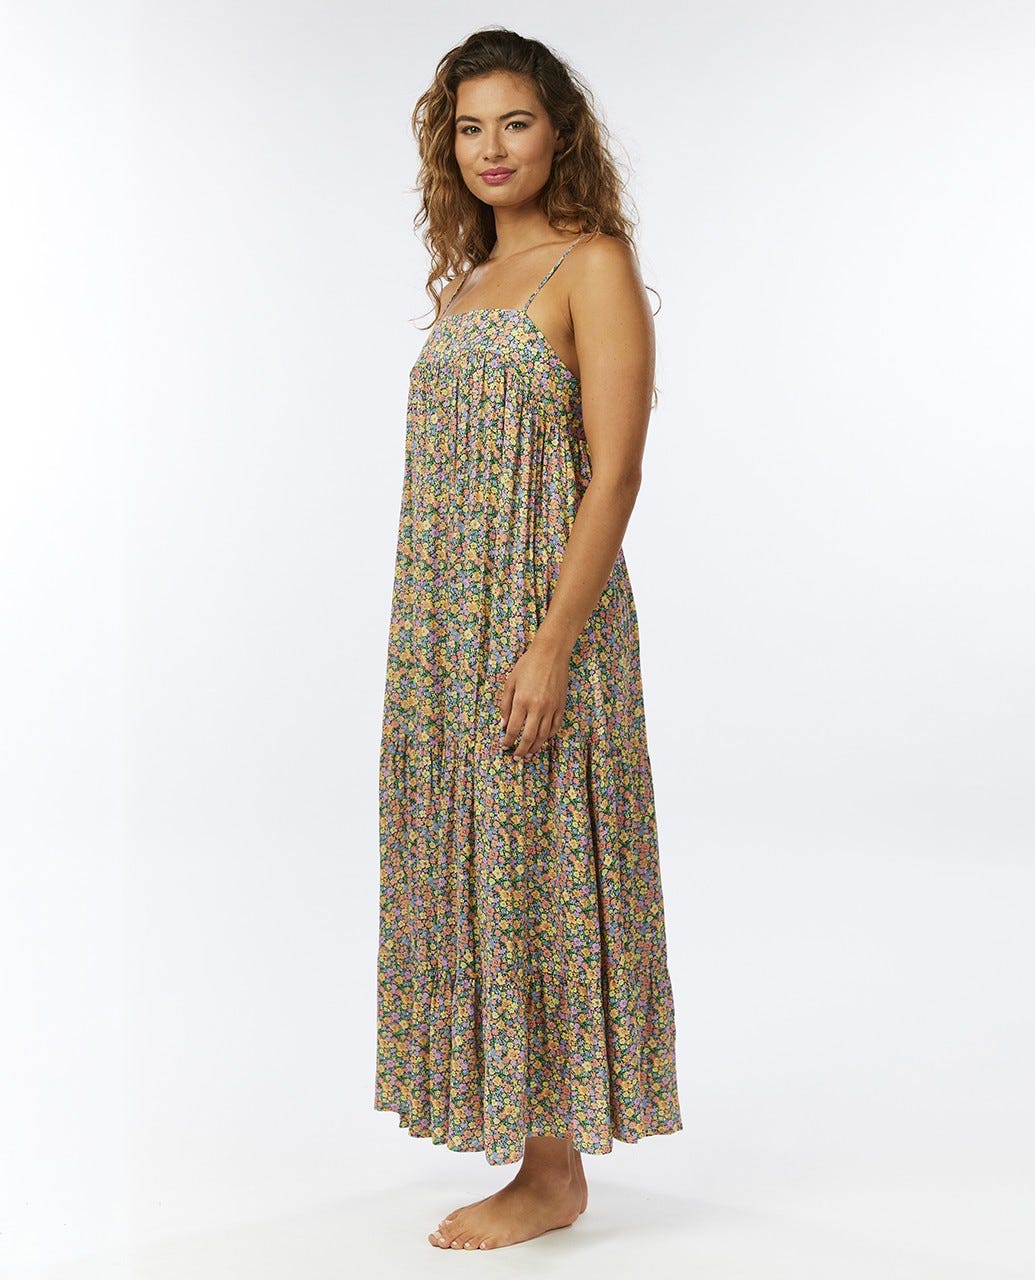 Afterglow Ditsy Maxi Dress